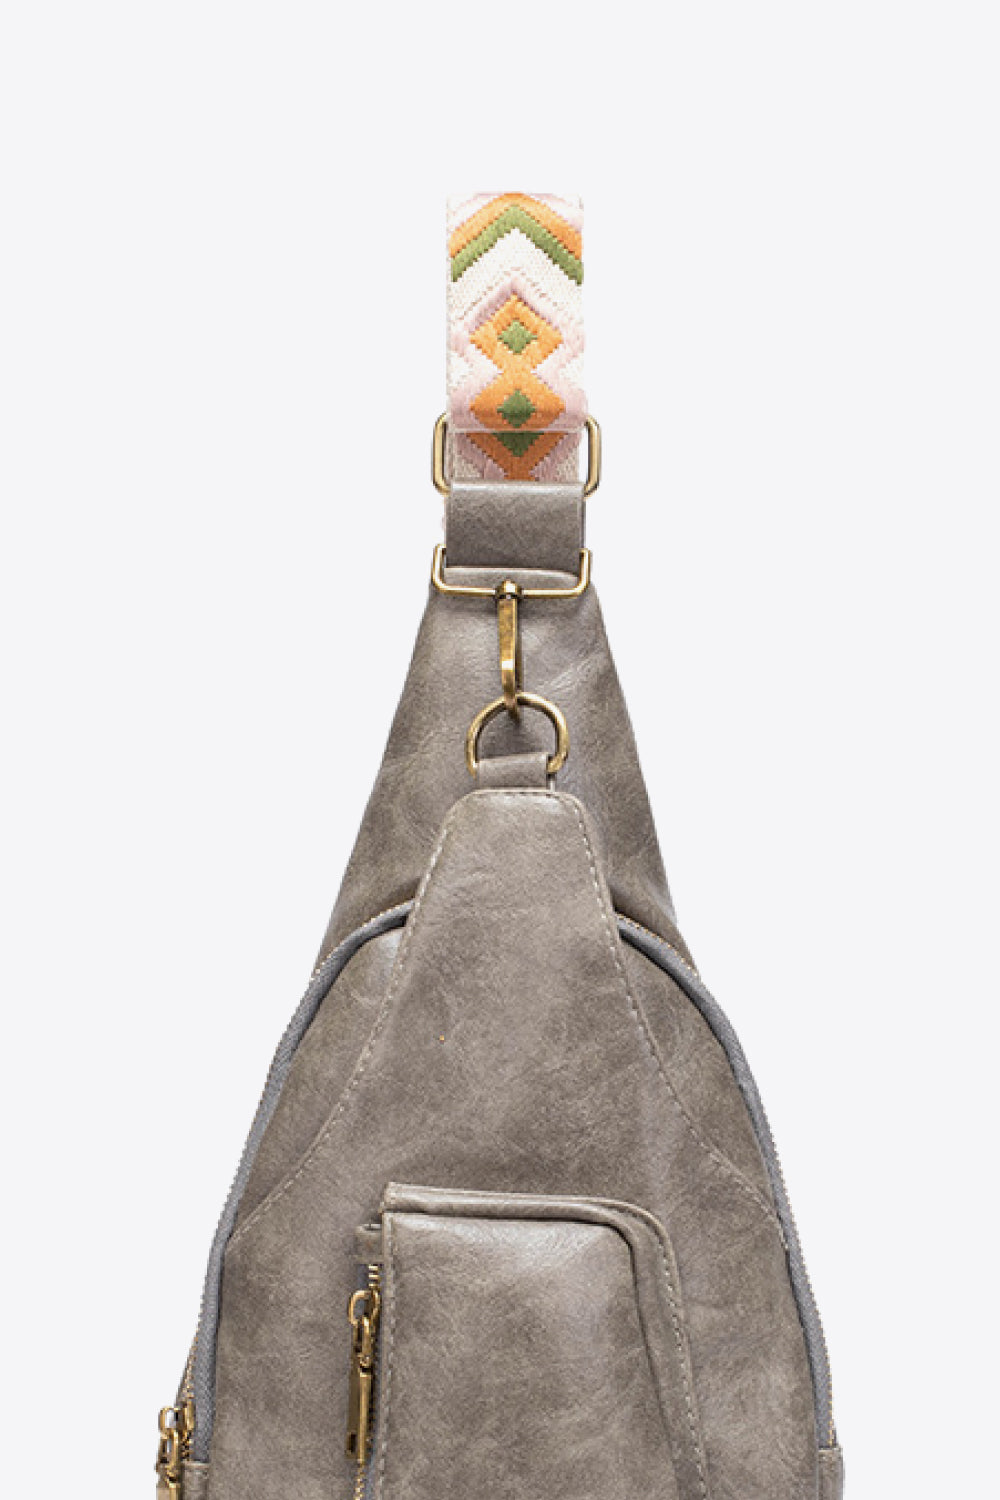 GRAY ONE SIZE - All The Feels PU Leather Sling Bag - handbag at TFC&H Co.